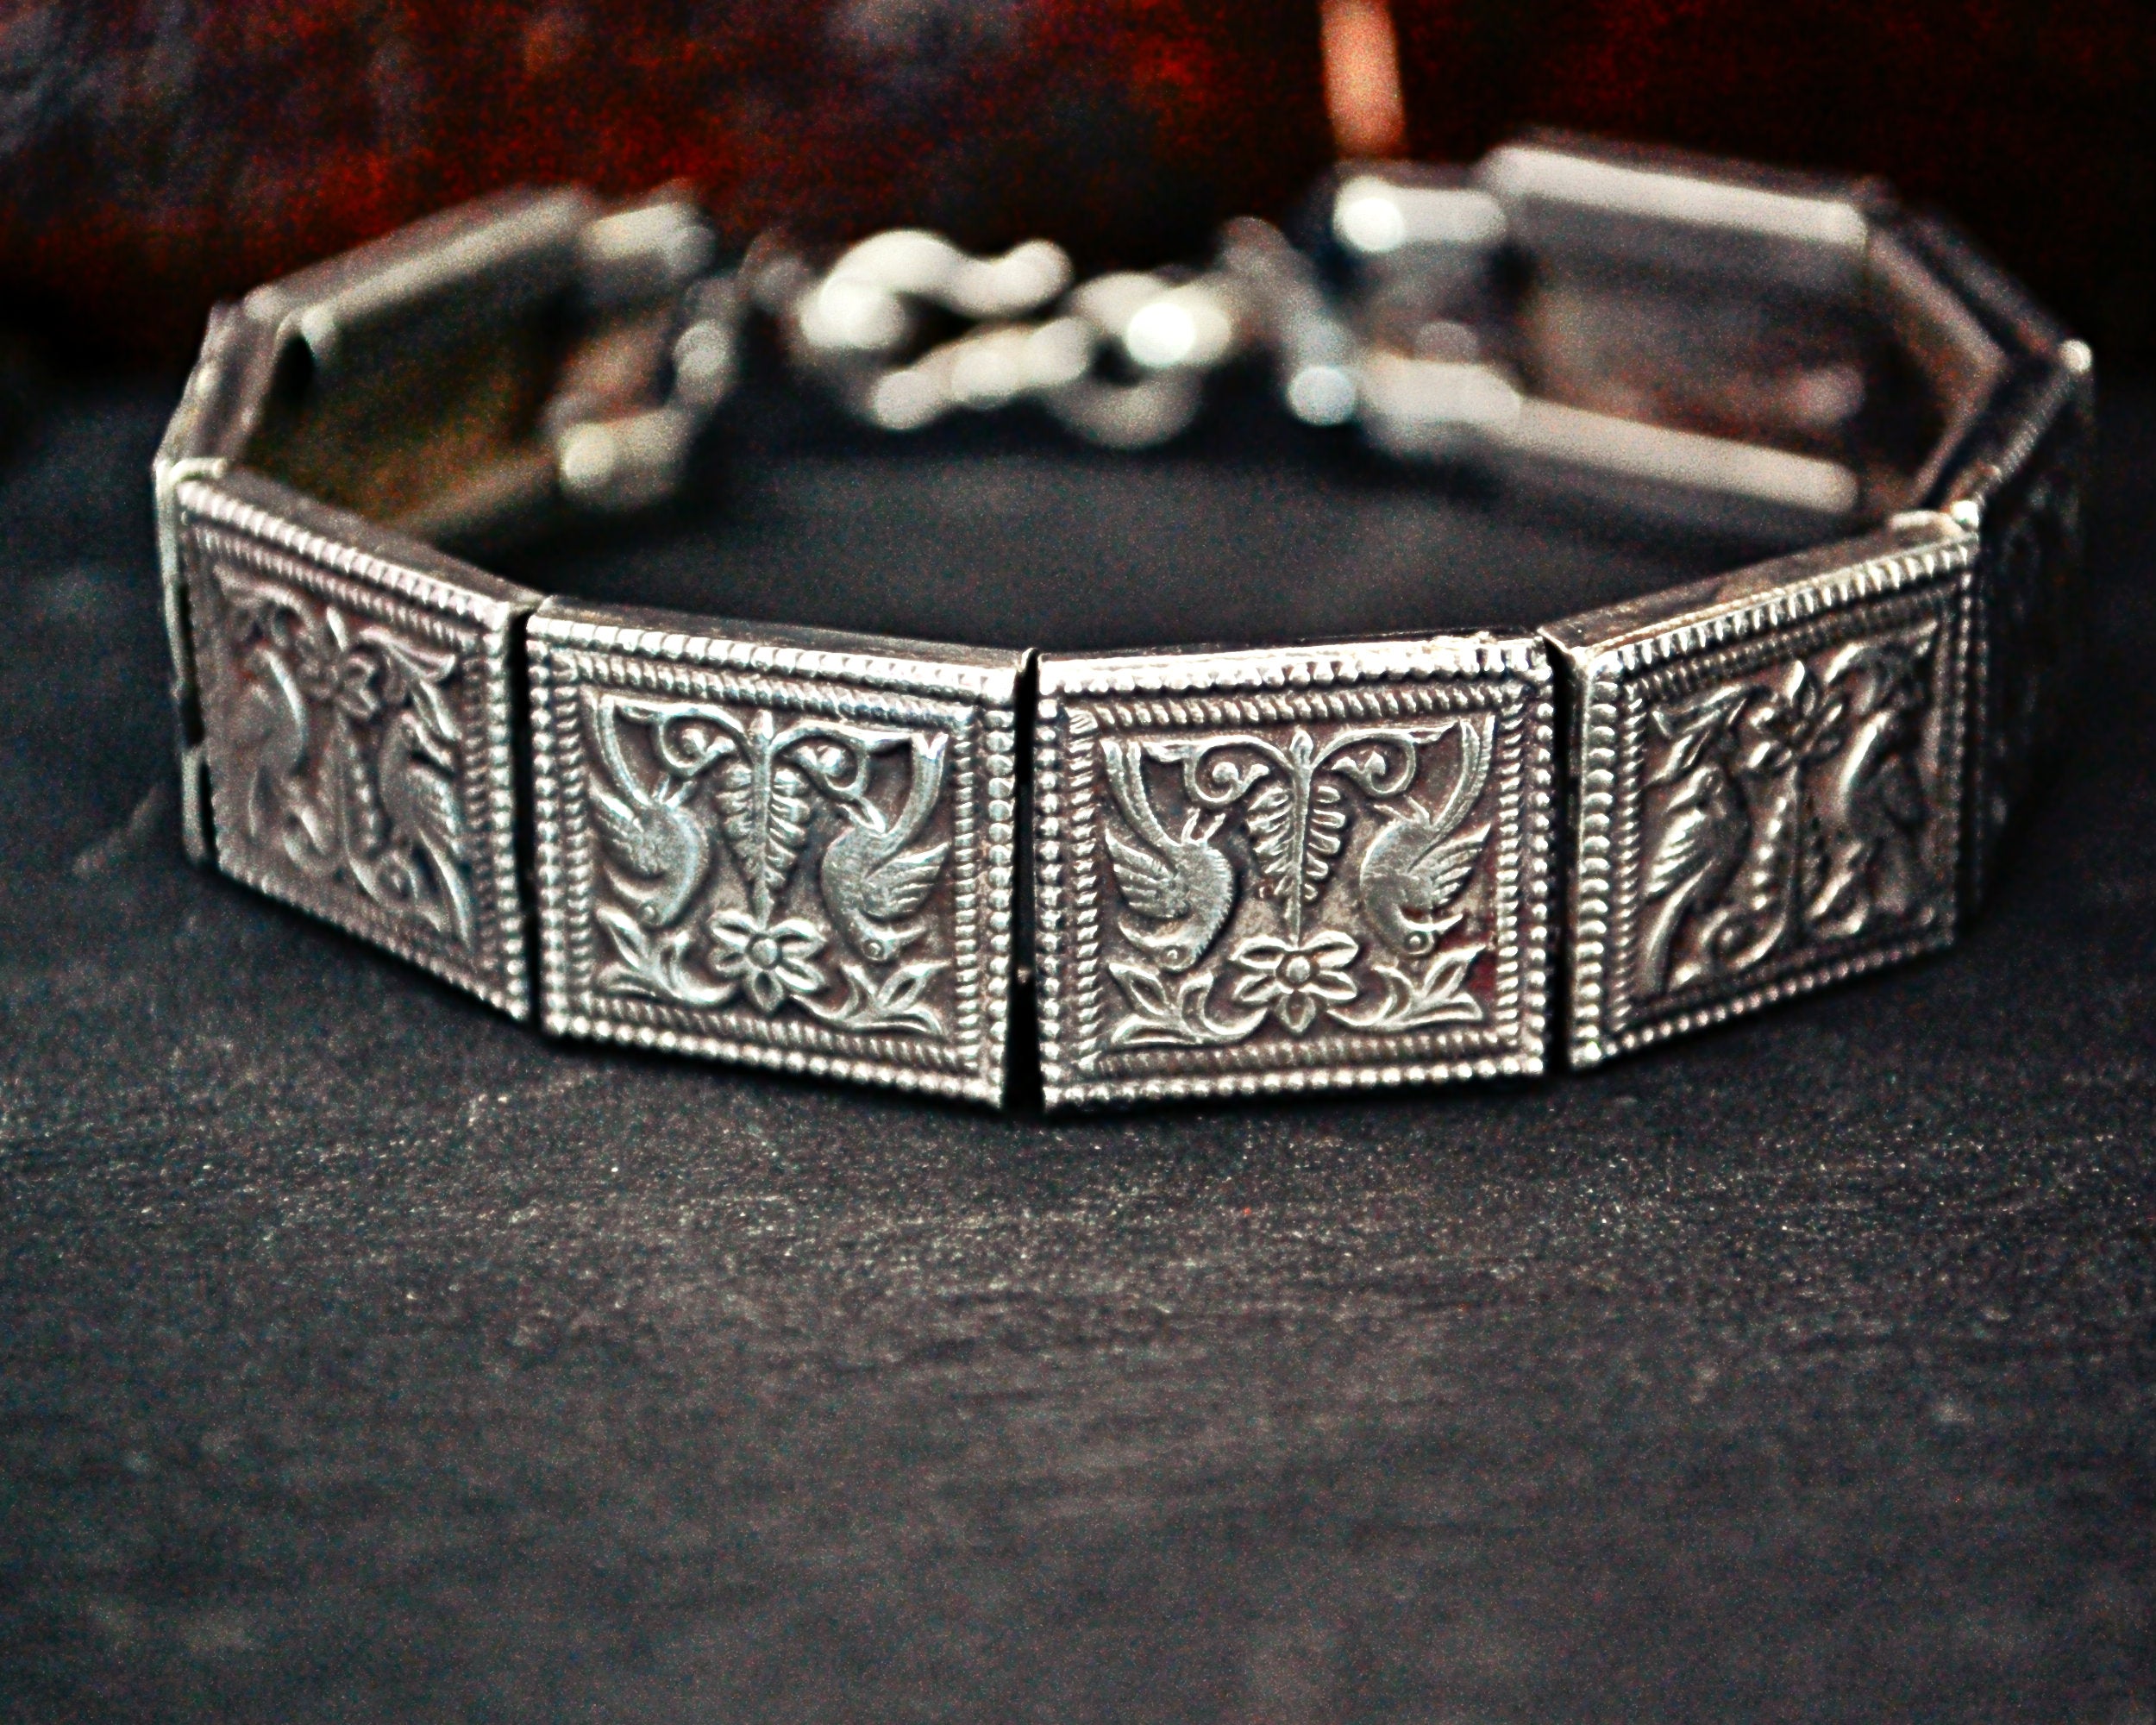 Rajasthani Silver Bracelet with Peacocks